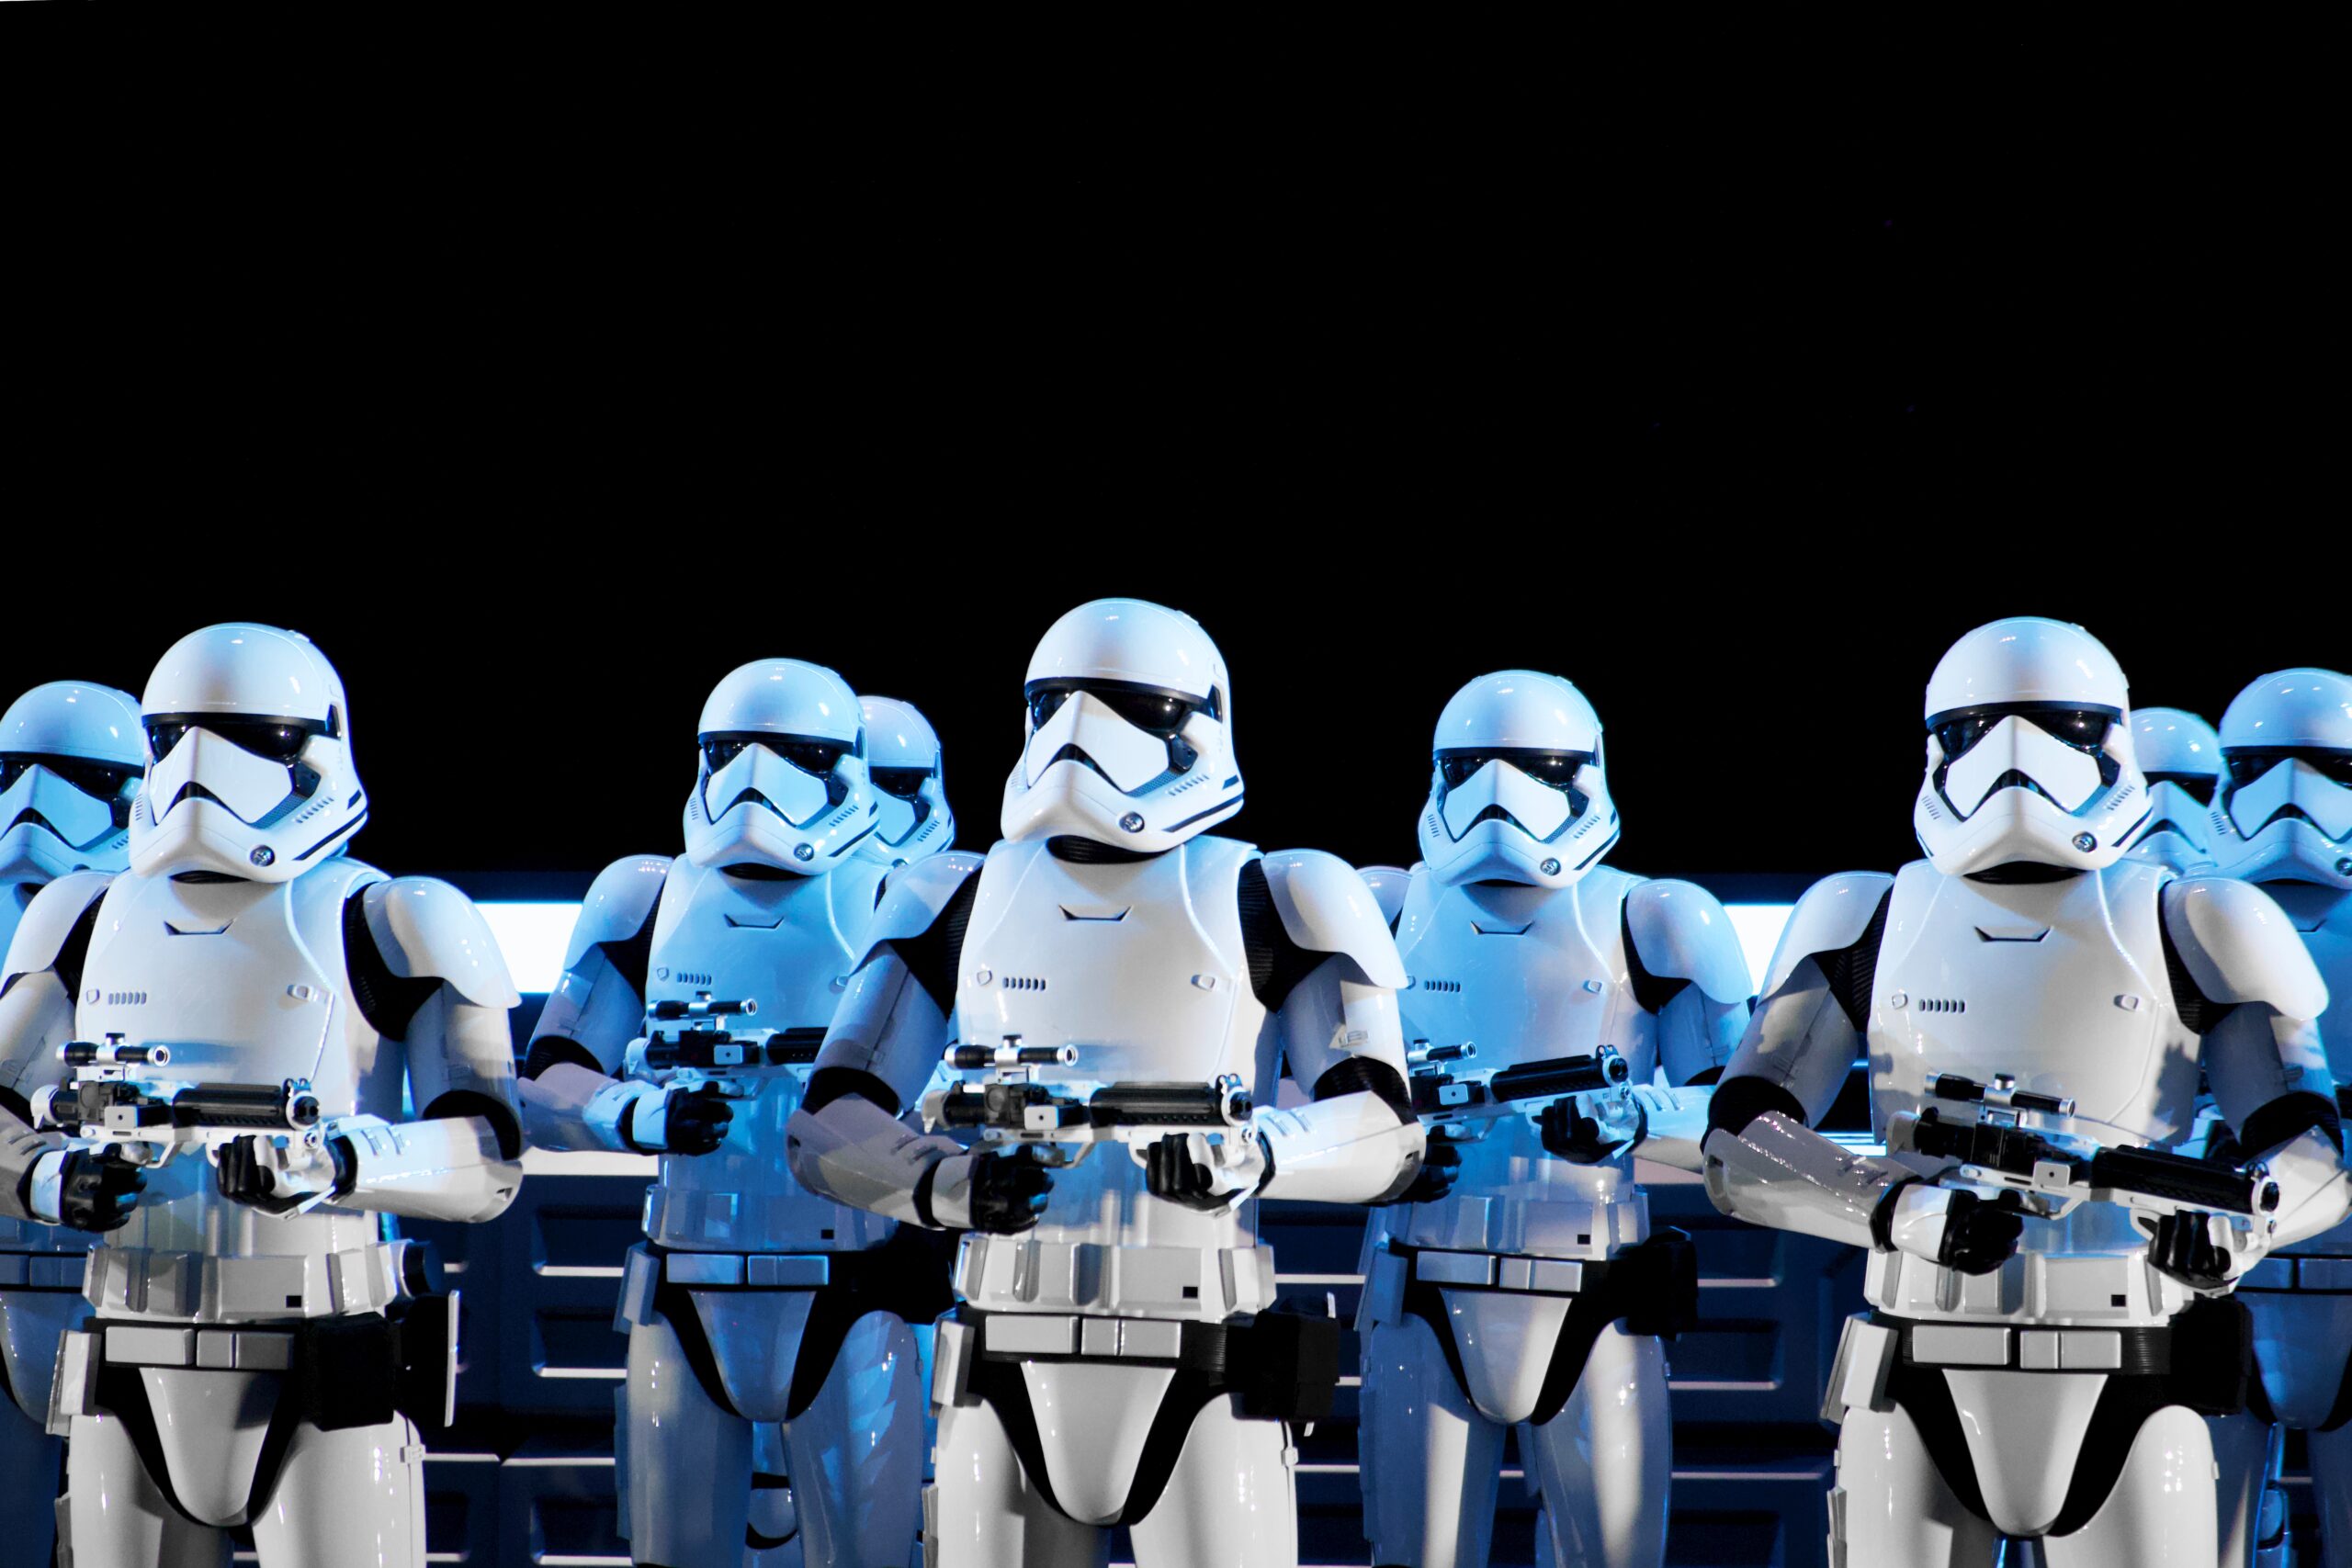 A row of stormtroopers